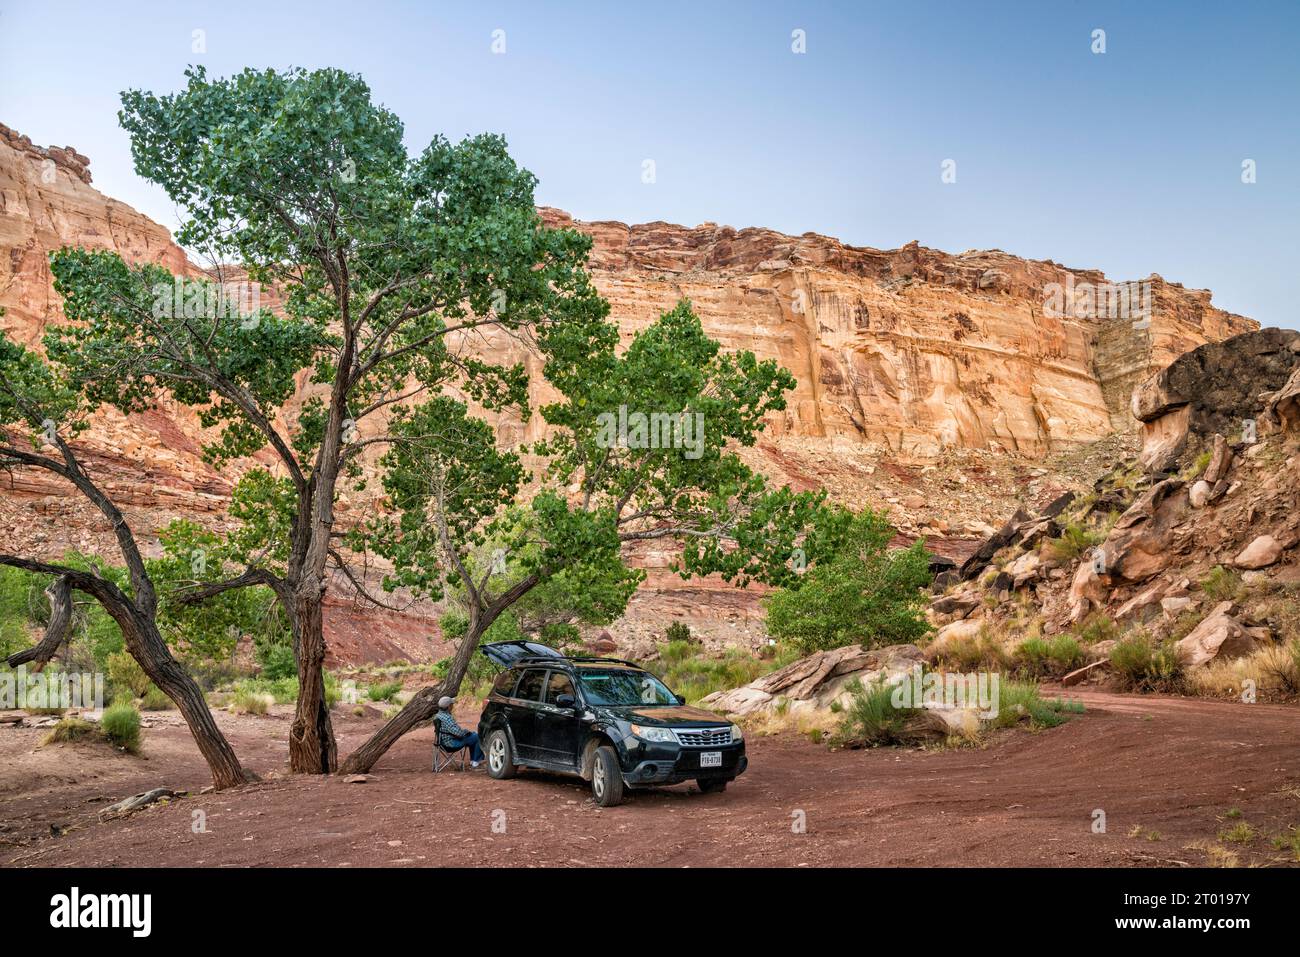 Vehicle at Behind-the-Reef Road, riparian zone at Chute Canyon entrance, San Rafael Reef rock formations, Little Ocean Draw Wilderness, Utah, USA Stock Photo